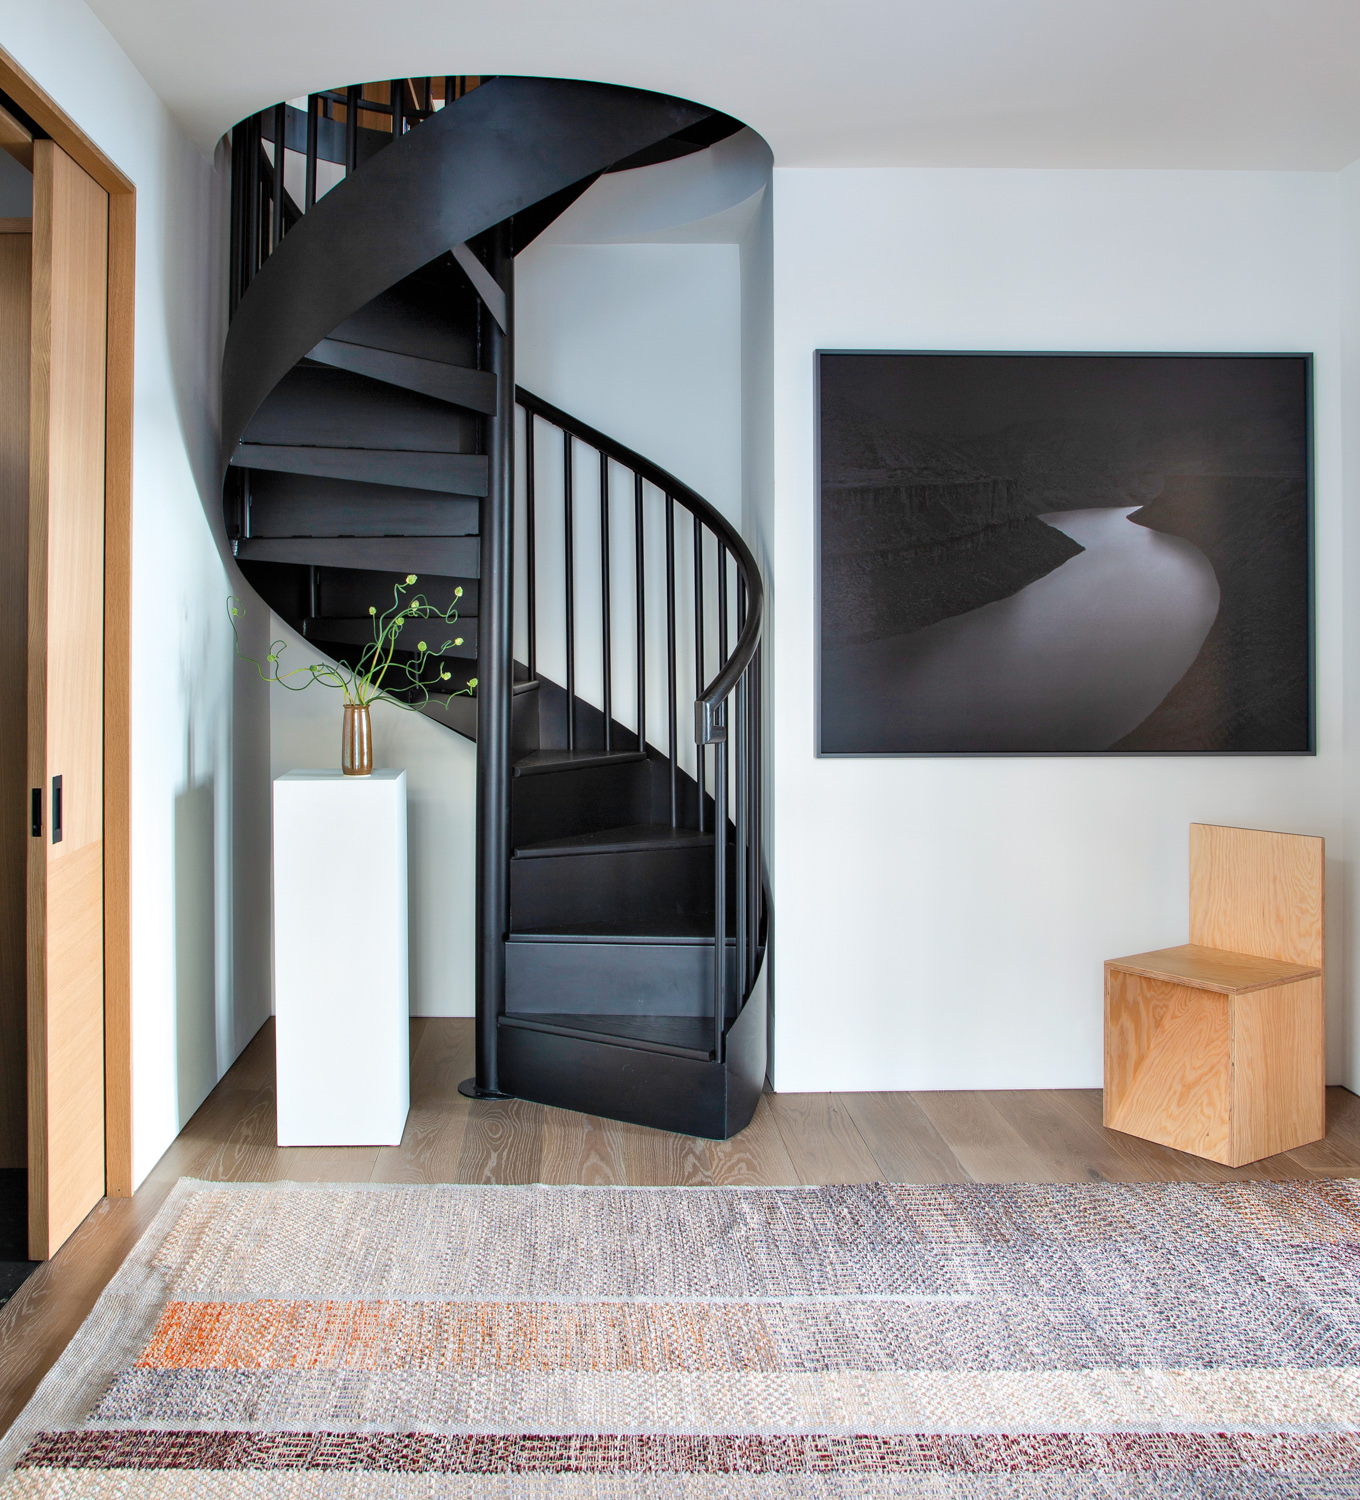 entryway with black spiral staircase leading to library loft and framed photograph on wall